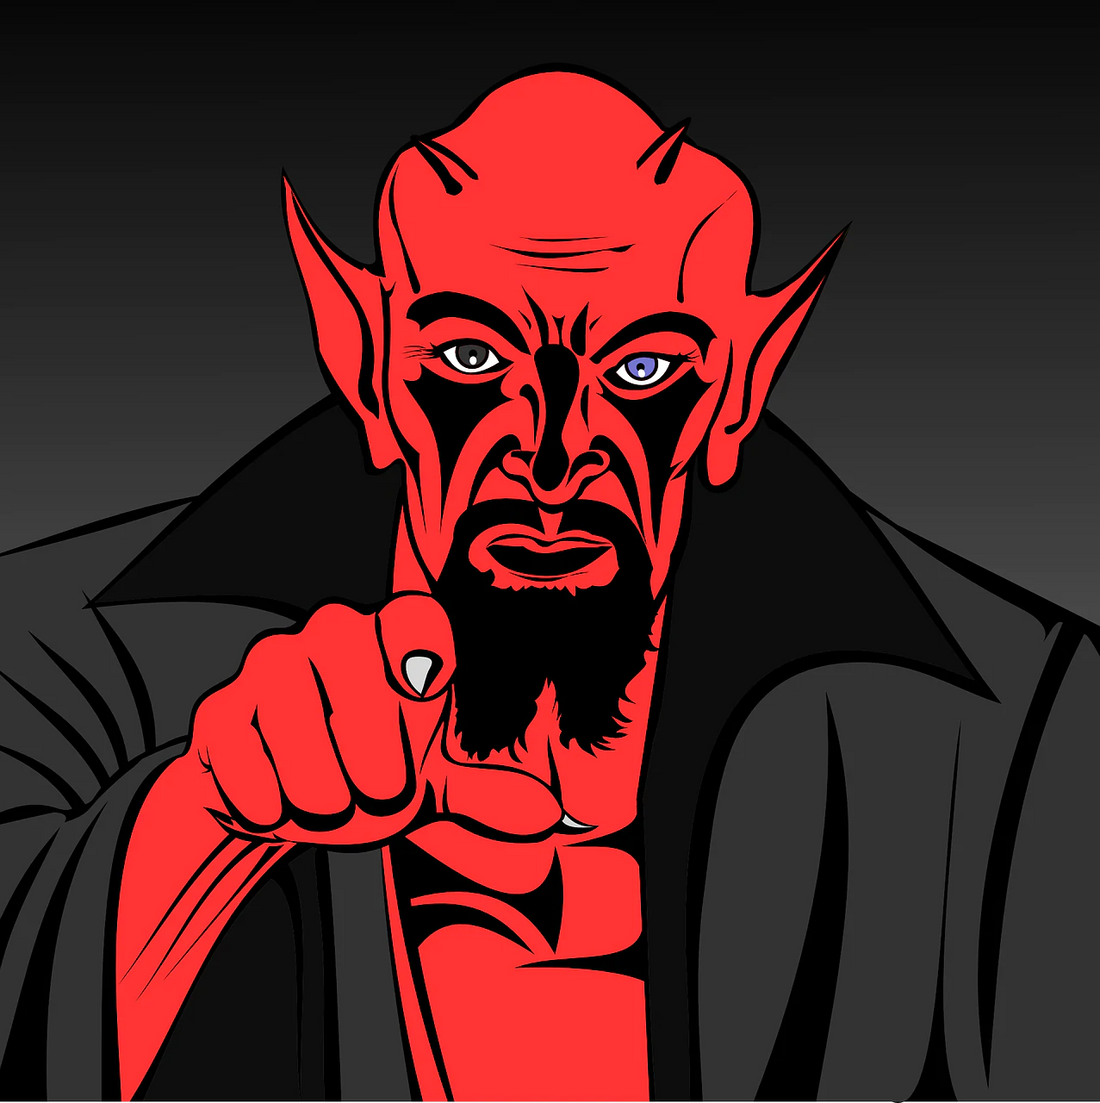 Red Demon with Black Jacket on, open to see red chest and a fist with a pointing finger pointing at you with sharpened finger nail. 